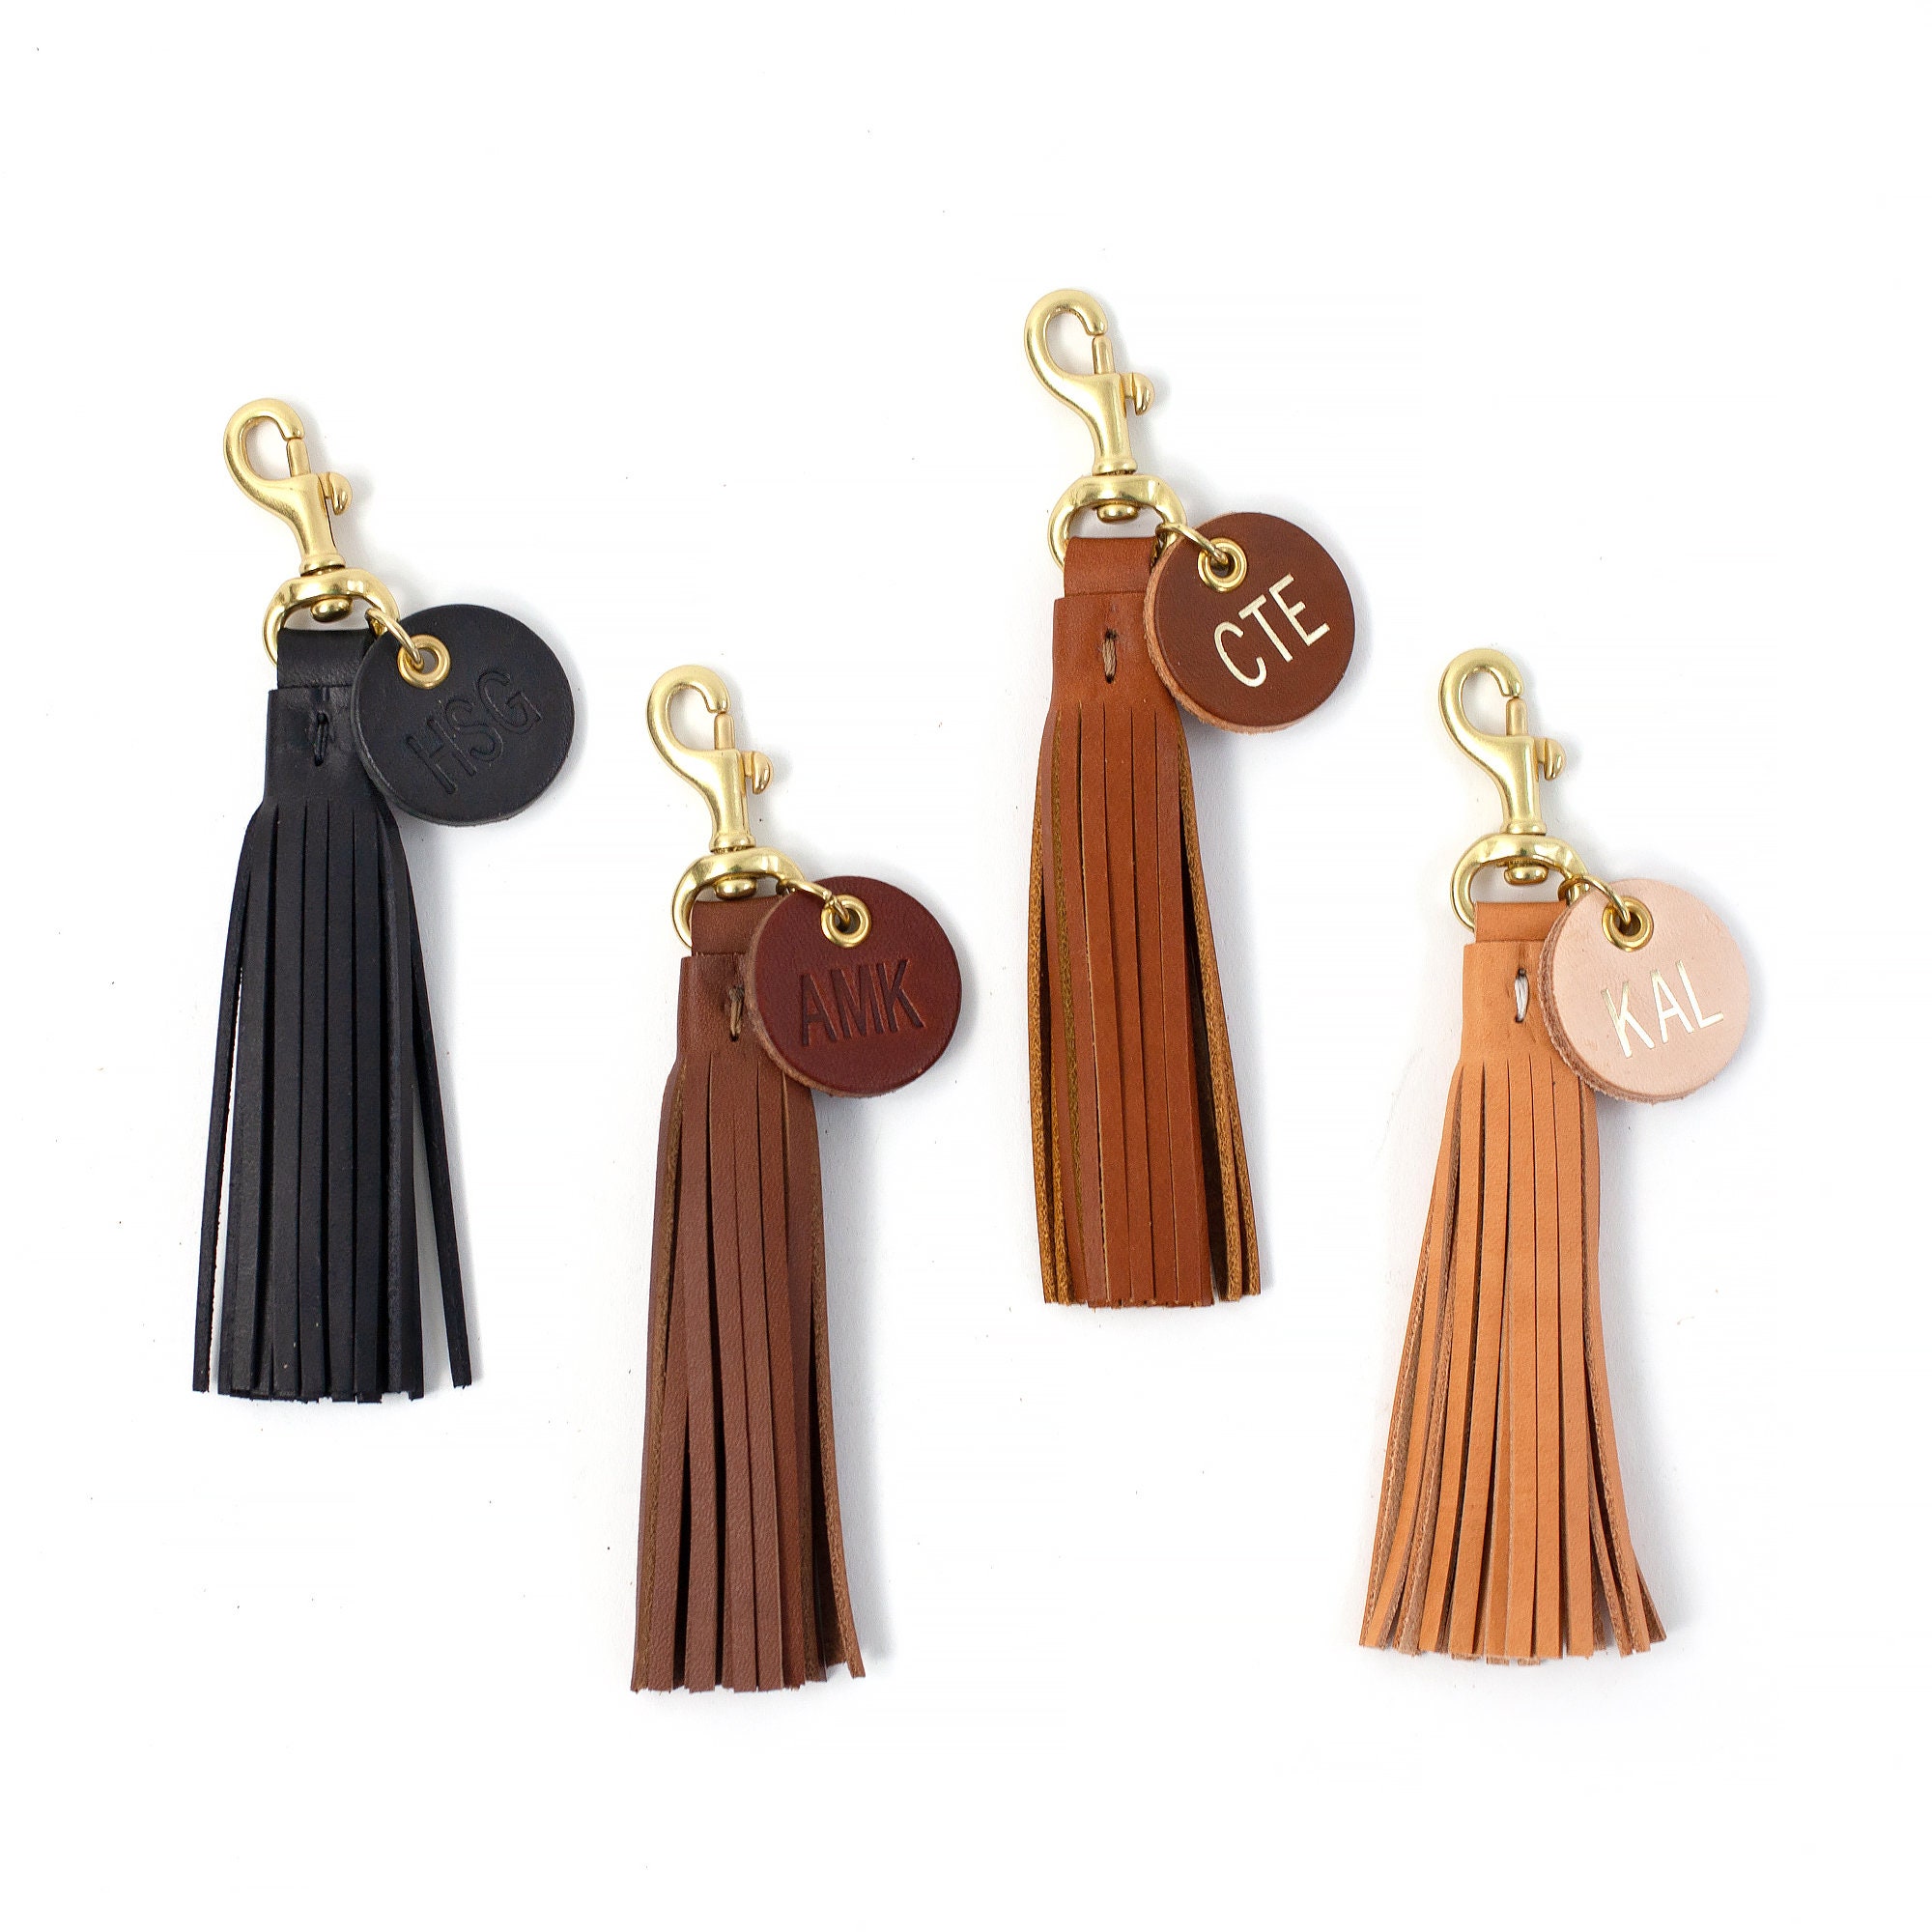 KJMYYXGS Leather Tassel Keychain Bulk, 6Pcs Sunflower Tassels for Keychain  with Key Rings Circle, Leather Tassels Purse Charms for Jewelry Making